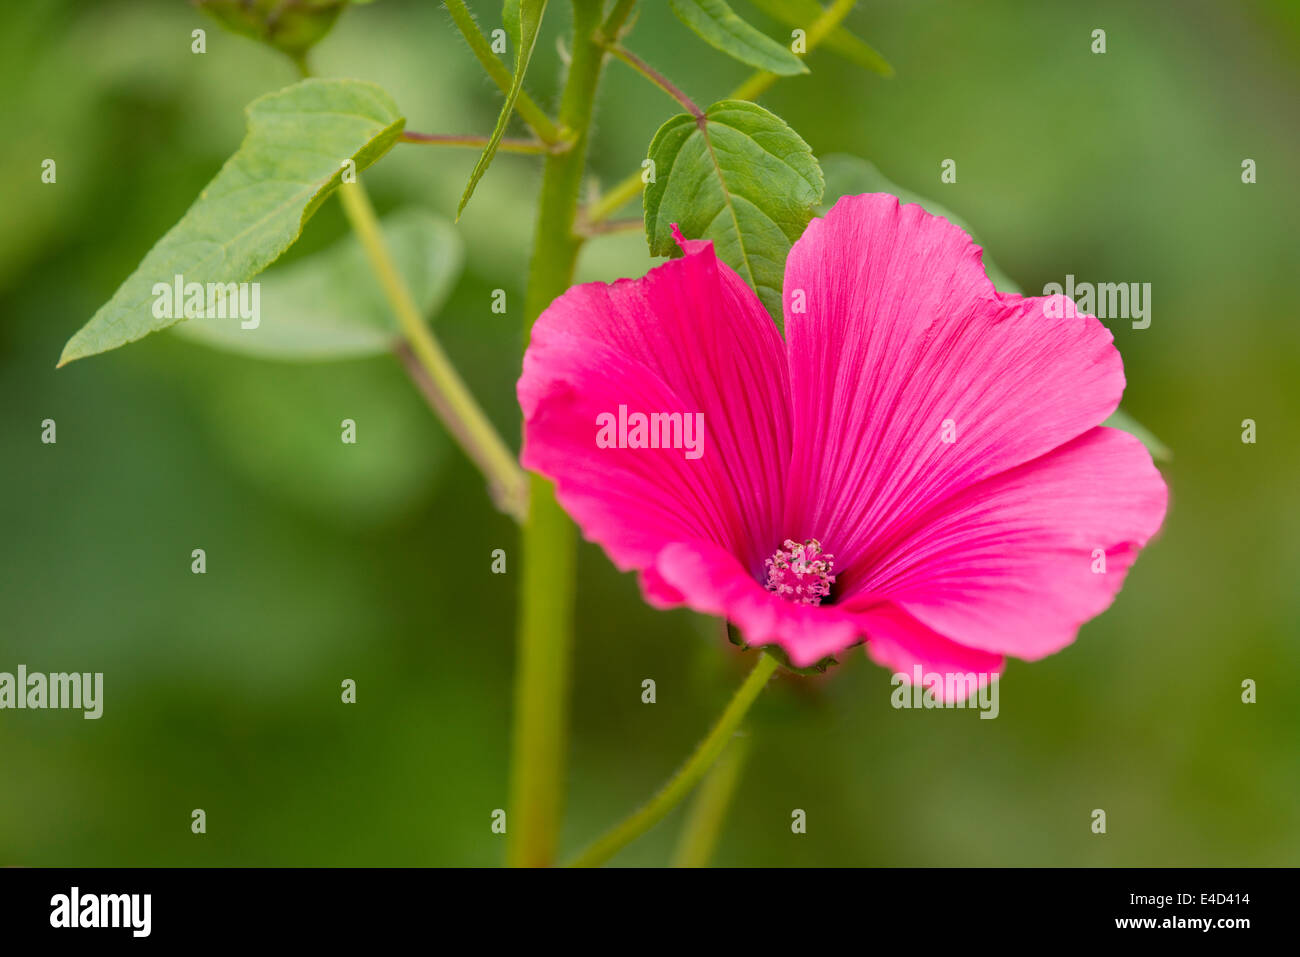 Annual mallow (Lavatera trimestris), flower and leaves, Lower Saxony, Germany Stock Photo